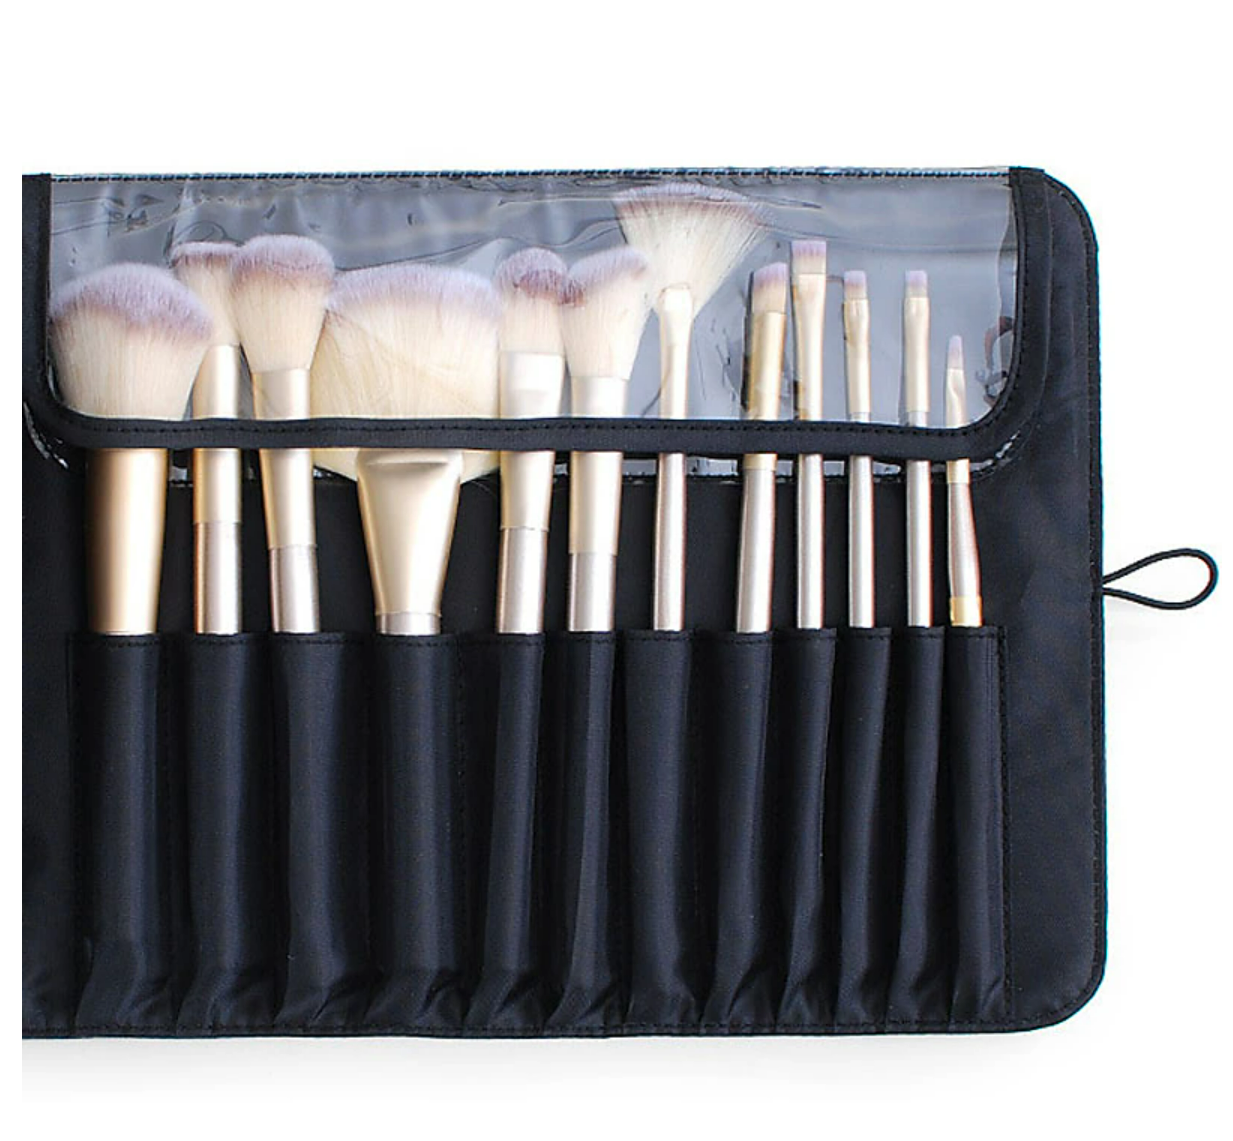 Portable Makeup Brush Organizer Makeup Brush Bag for Travel Can Hold 20 Brushes Cosmetic Bag Makeup Brush Roll Up Case Pouch Holder for Woman(Only Bag)